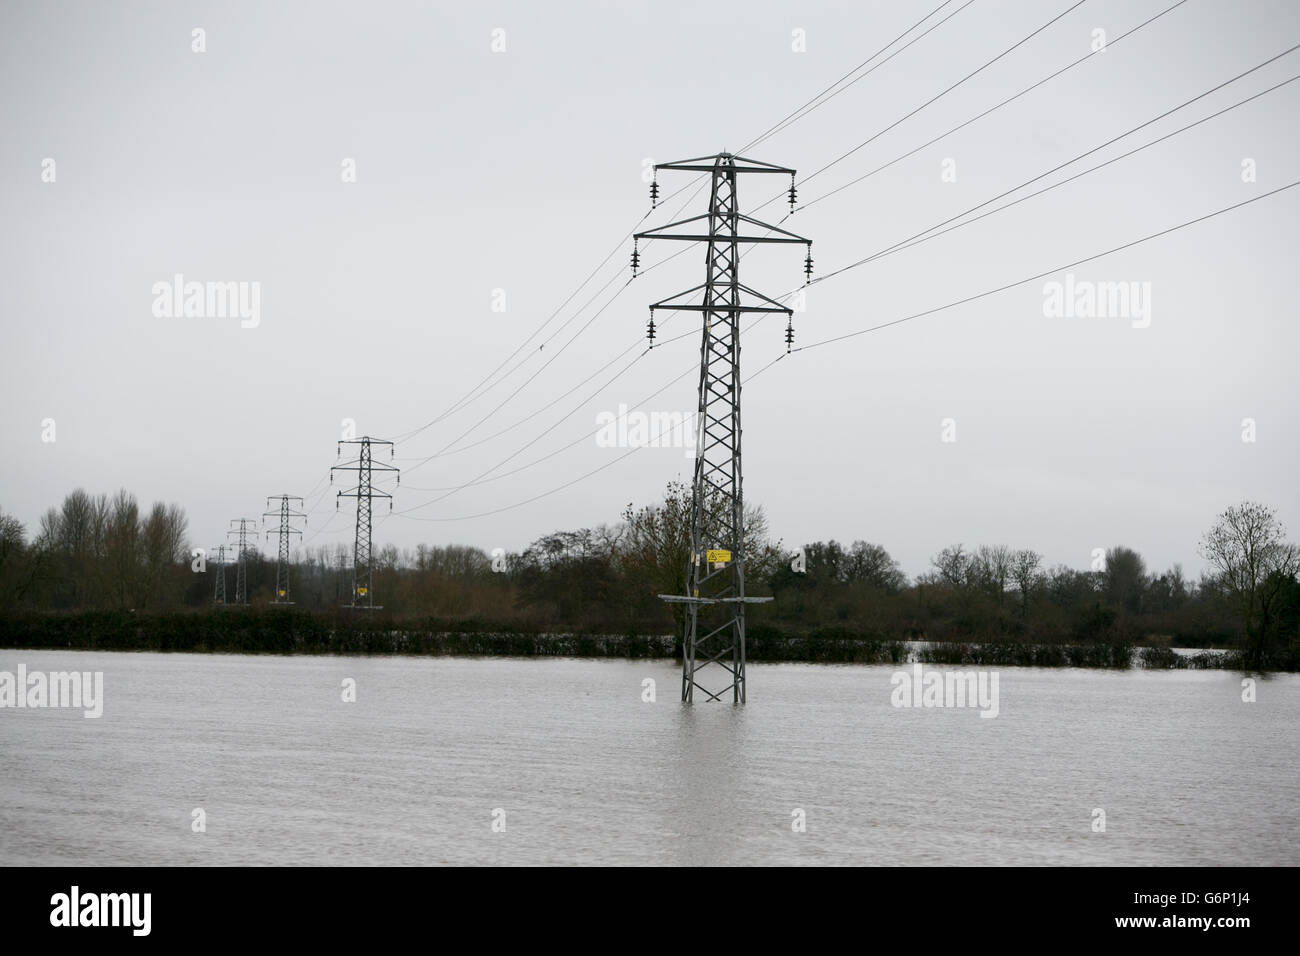 Electricity pylons are immersed in flood water near Shinfield, Berkshire, after the River Loddon burst its banks. Stock Photo